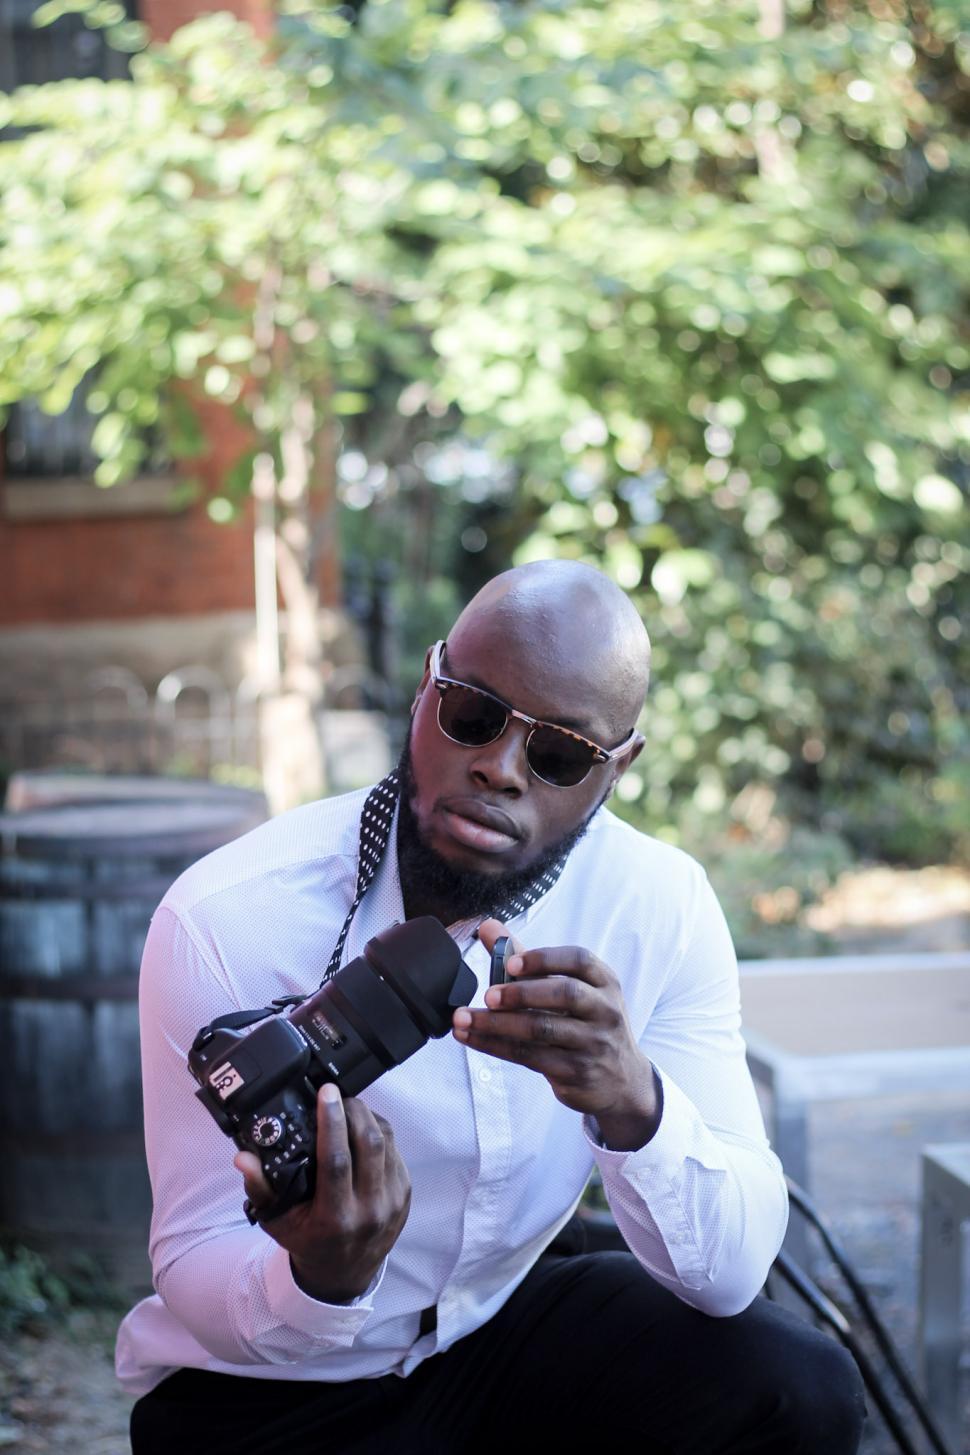 Free Image of Young Bald Man in Sunglasses With Camera 